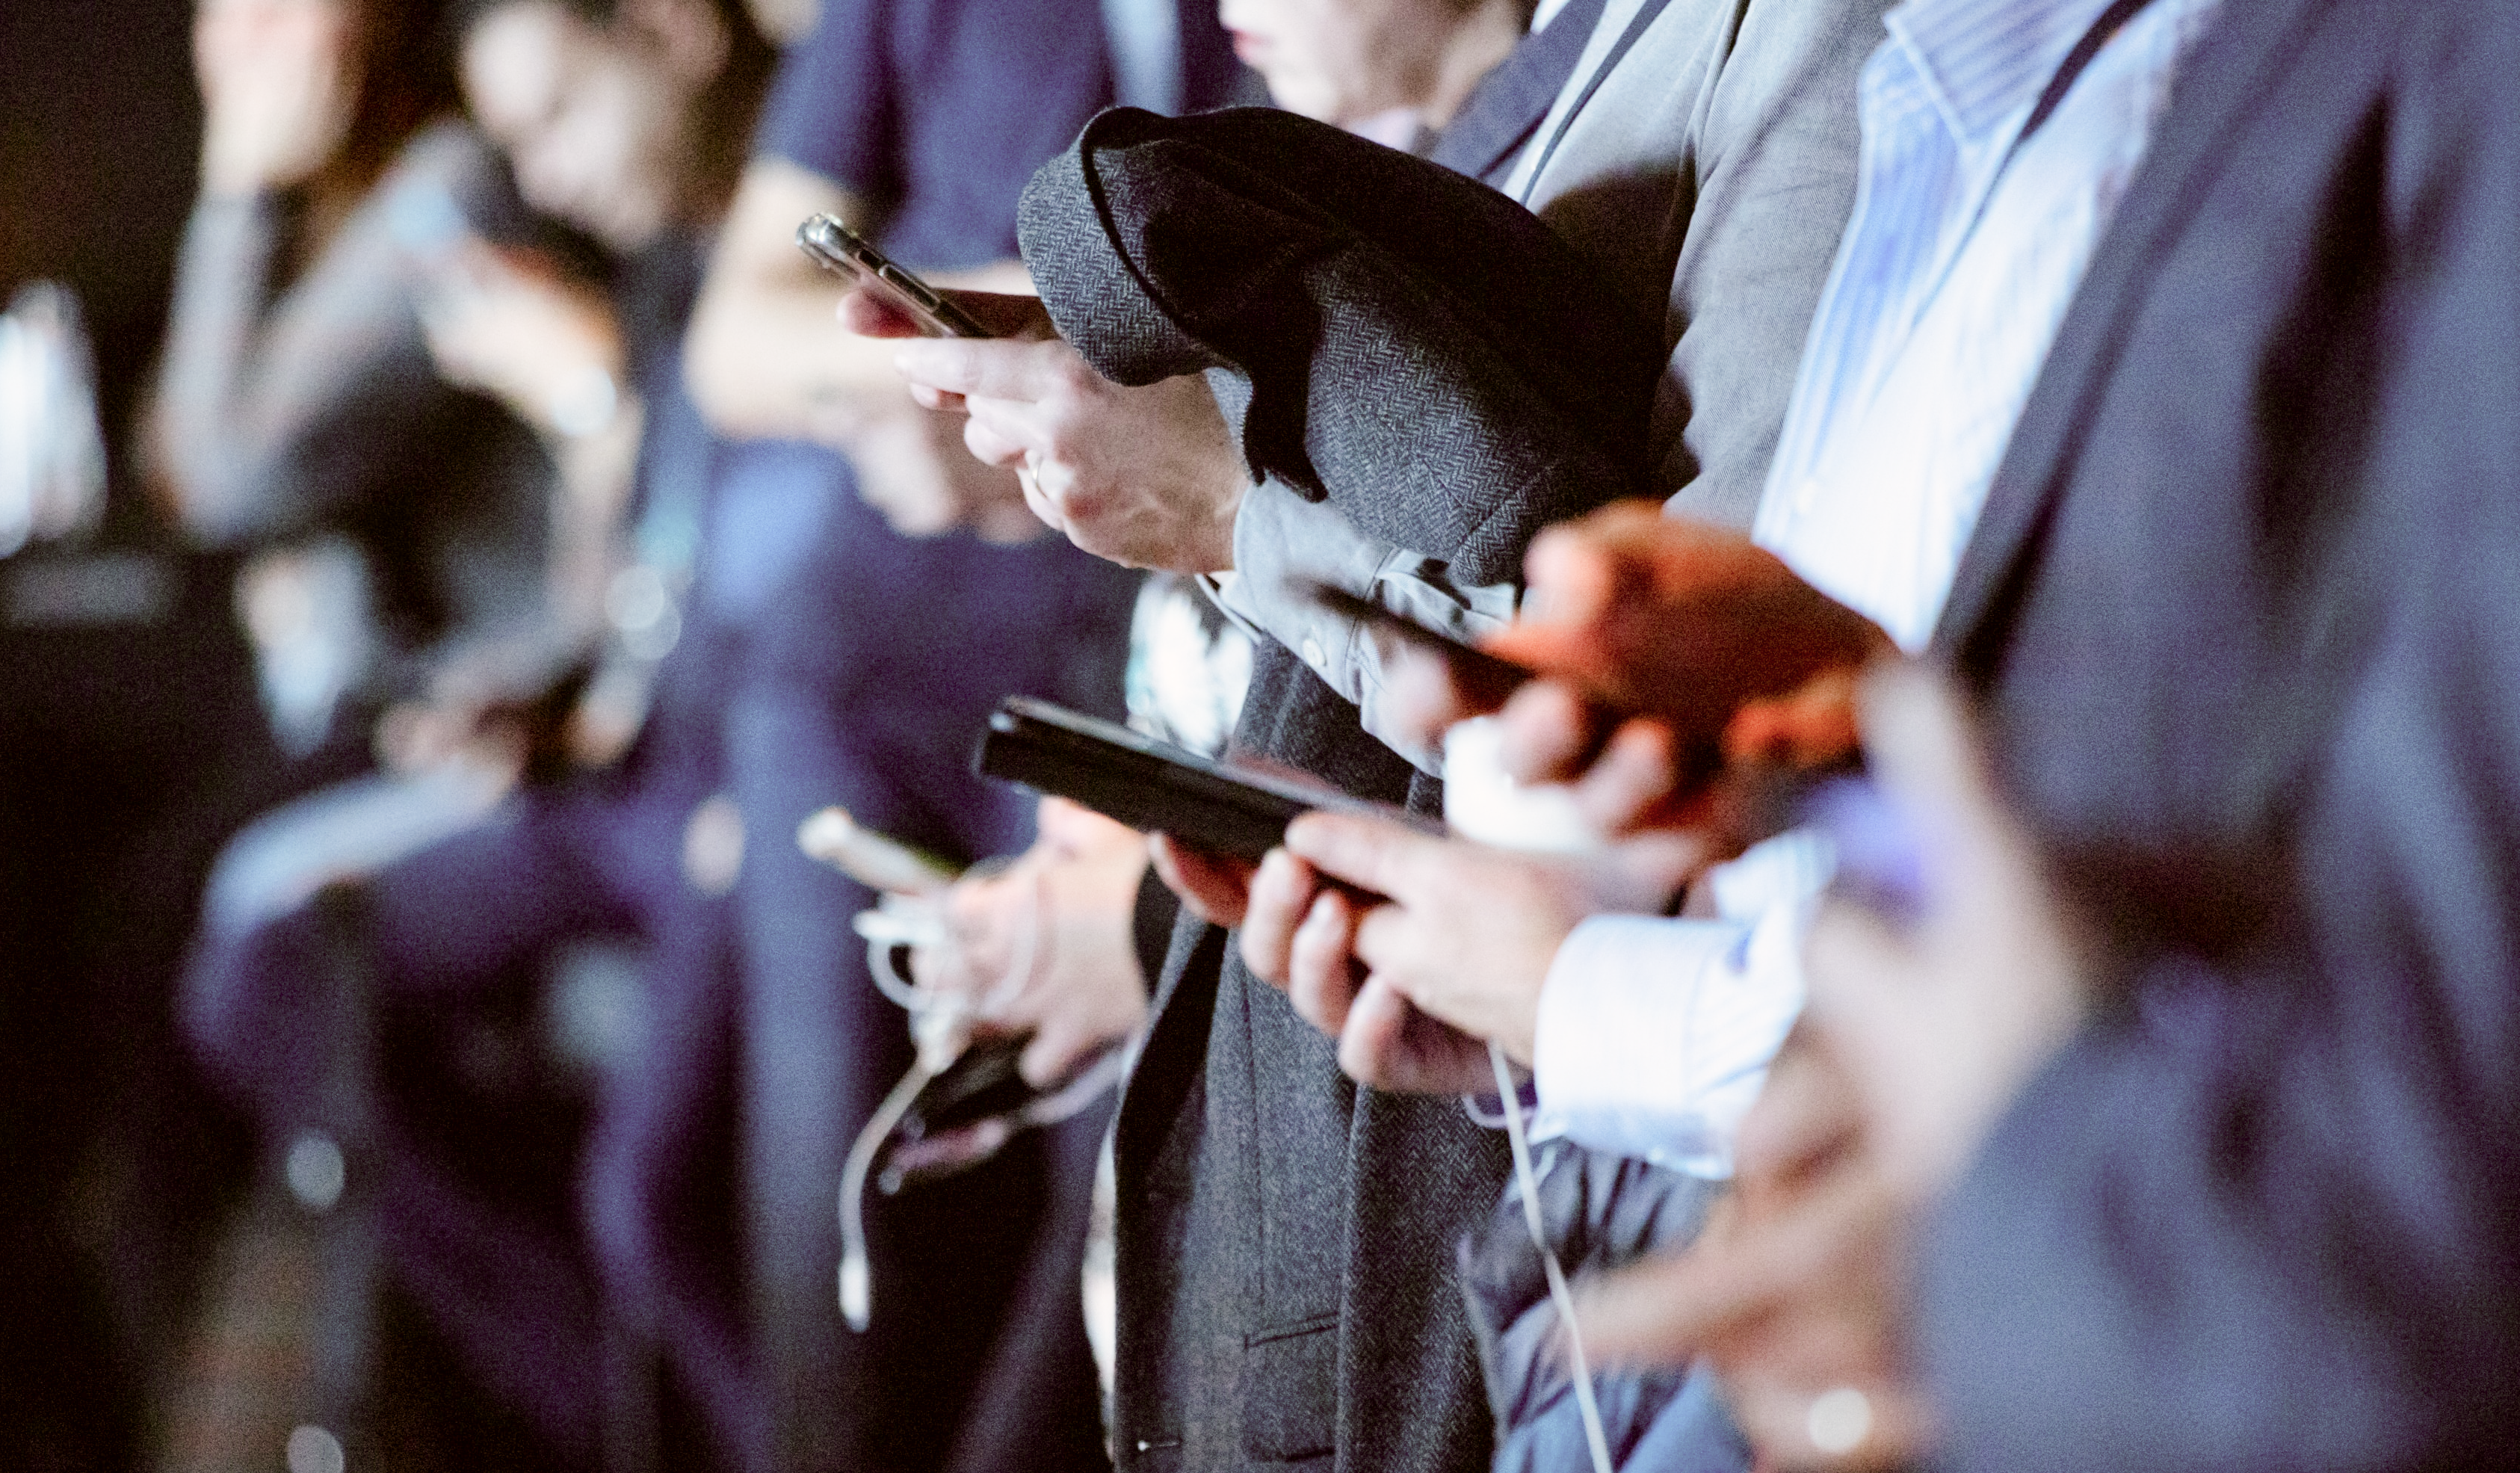 A close up profile of multiple people browsing smartphones.